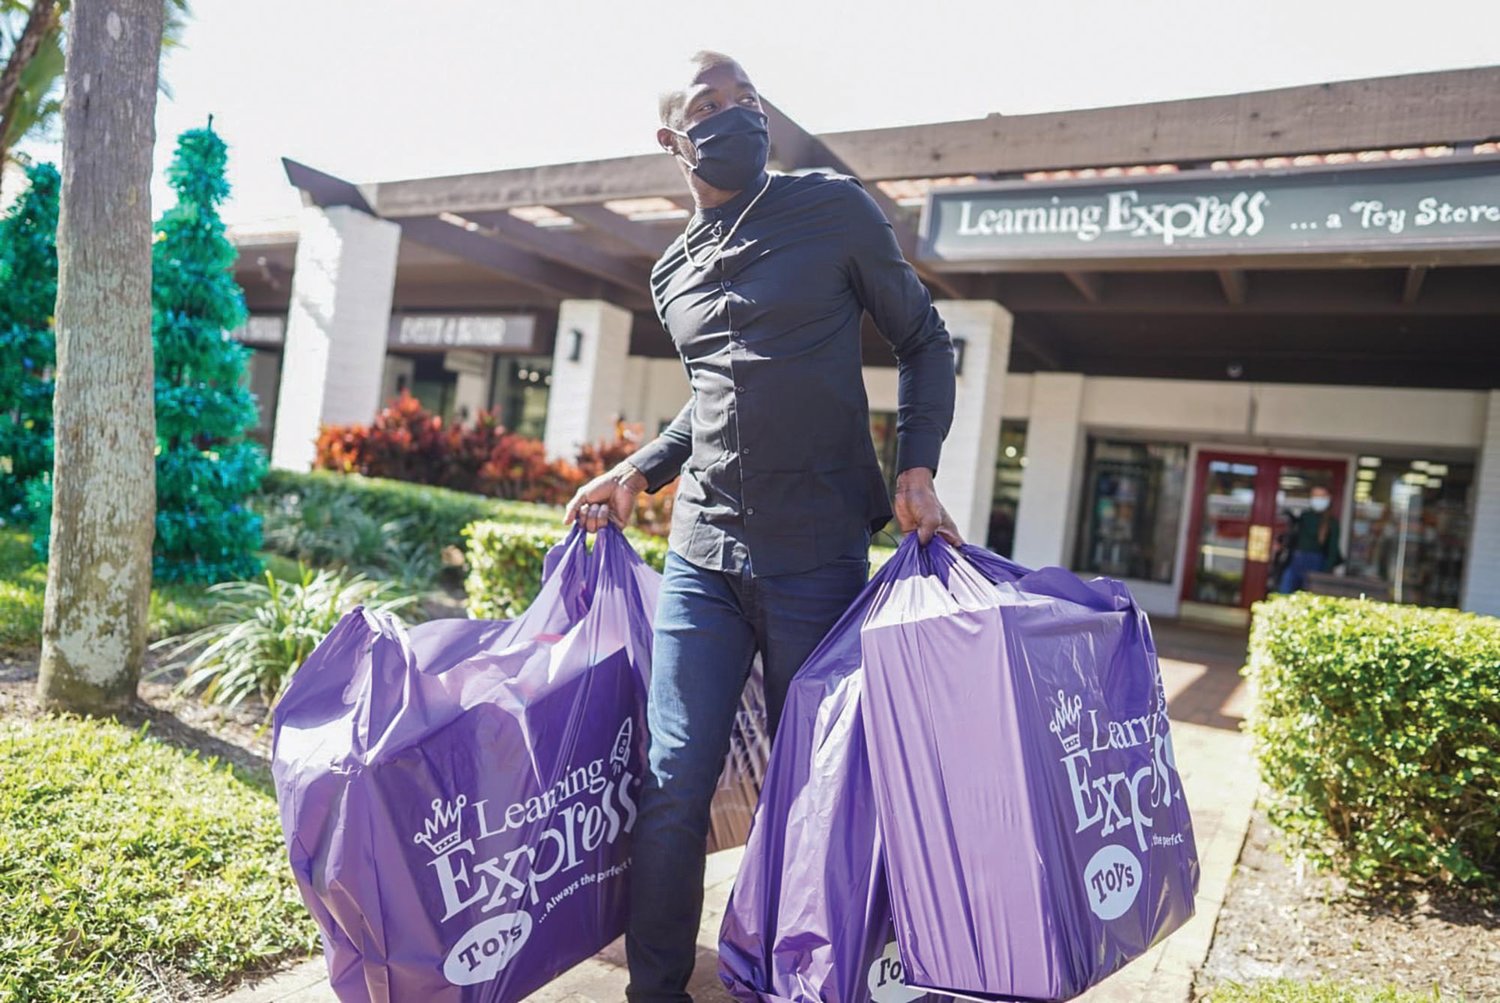 Santonio Holmes leaves the Learning Express with bags of toys for Belle Glade teens.